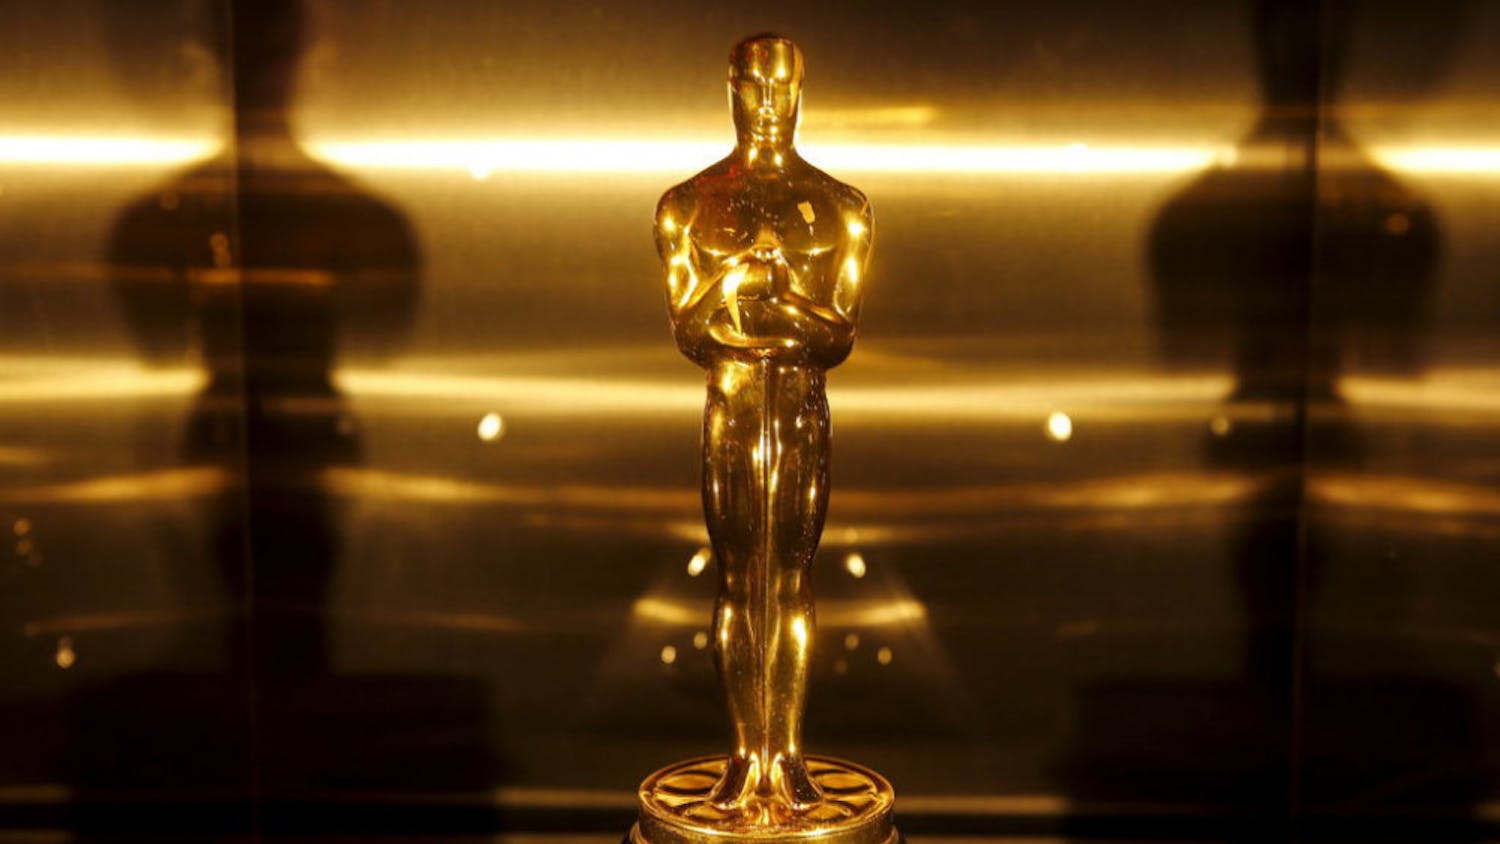 The 91st Academy Awards will air Sunday Feb. 24 at 8 p.m.